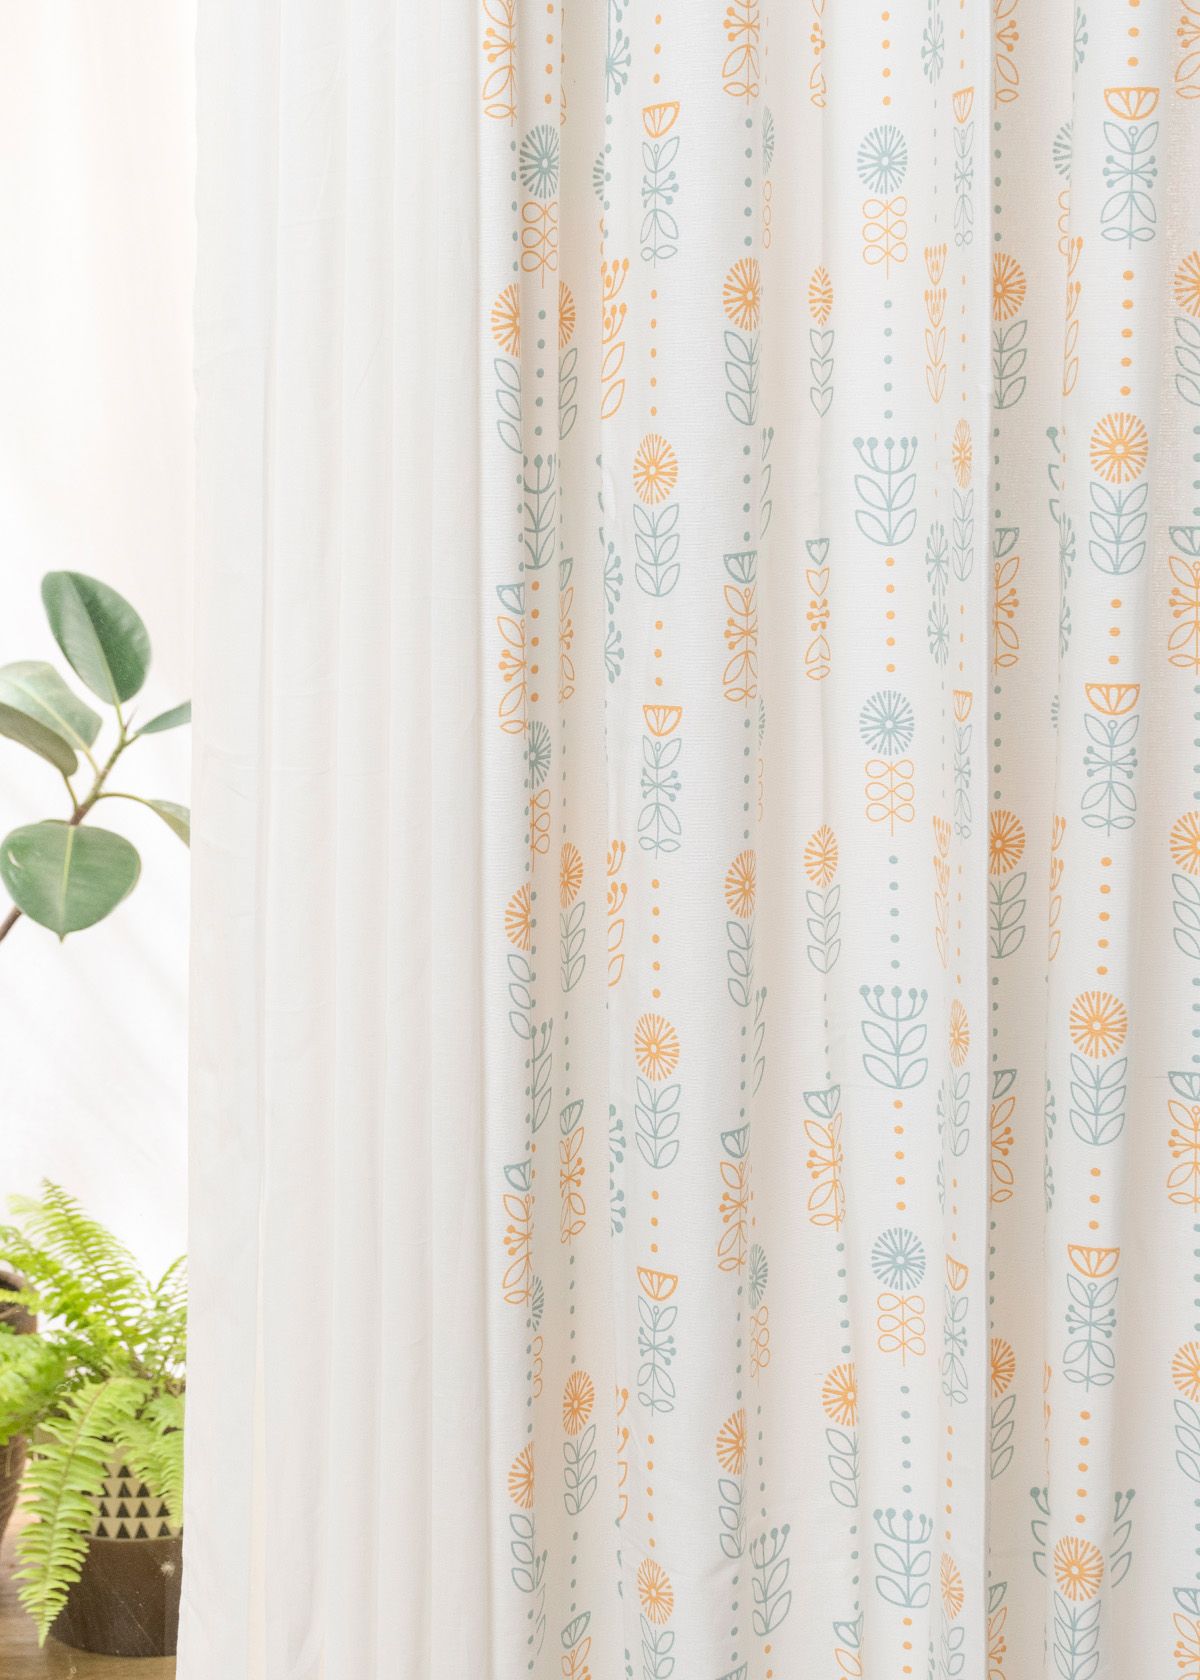 Wild Bouquet Corn Yellow, Warm White Solid Sheer Set Of 4 Combo Cotton Curtain - Corn Yellow And White